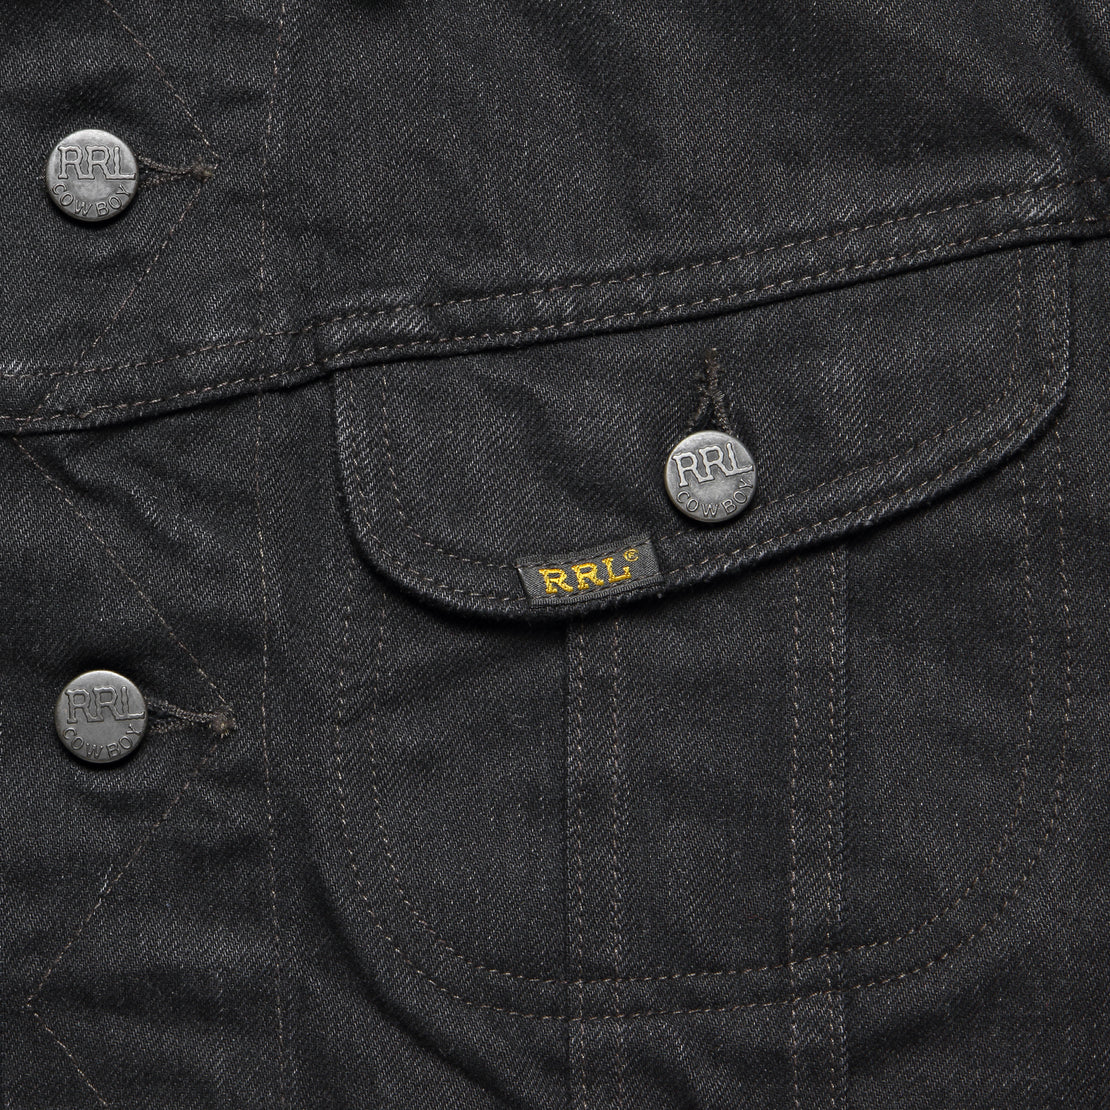 Lot 271 Trucker Jacket - Worn In Black - RRL - STAG Provisions - Outerwear - Coat / Jacket